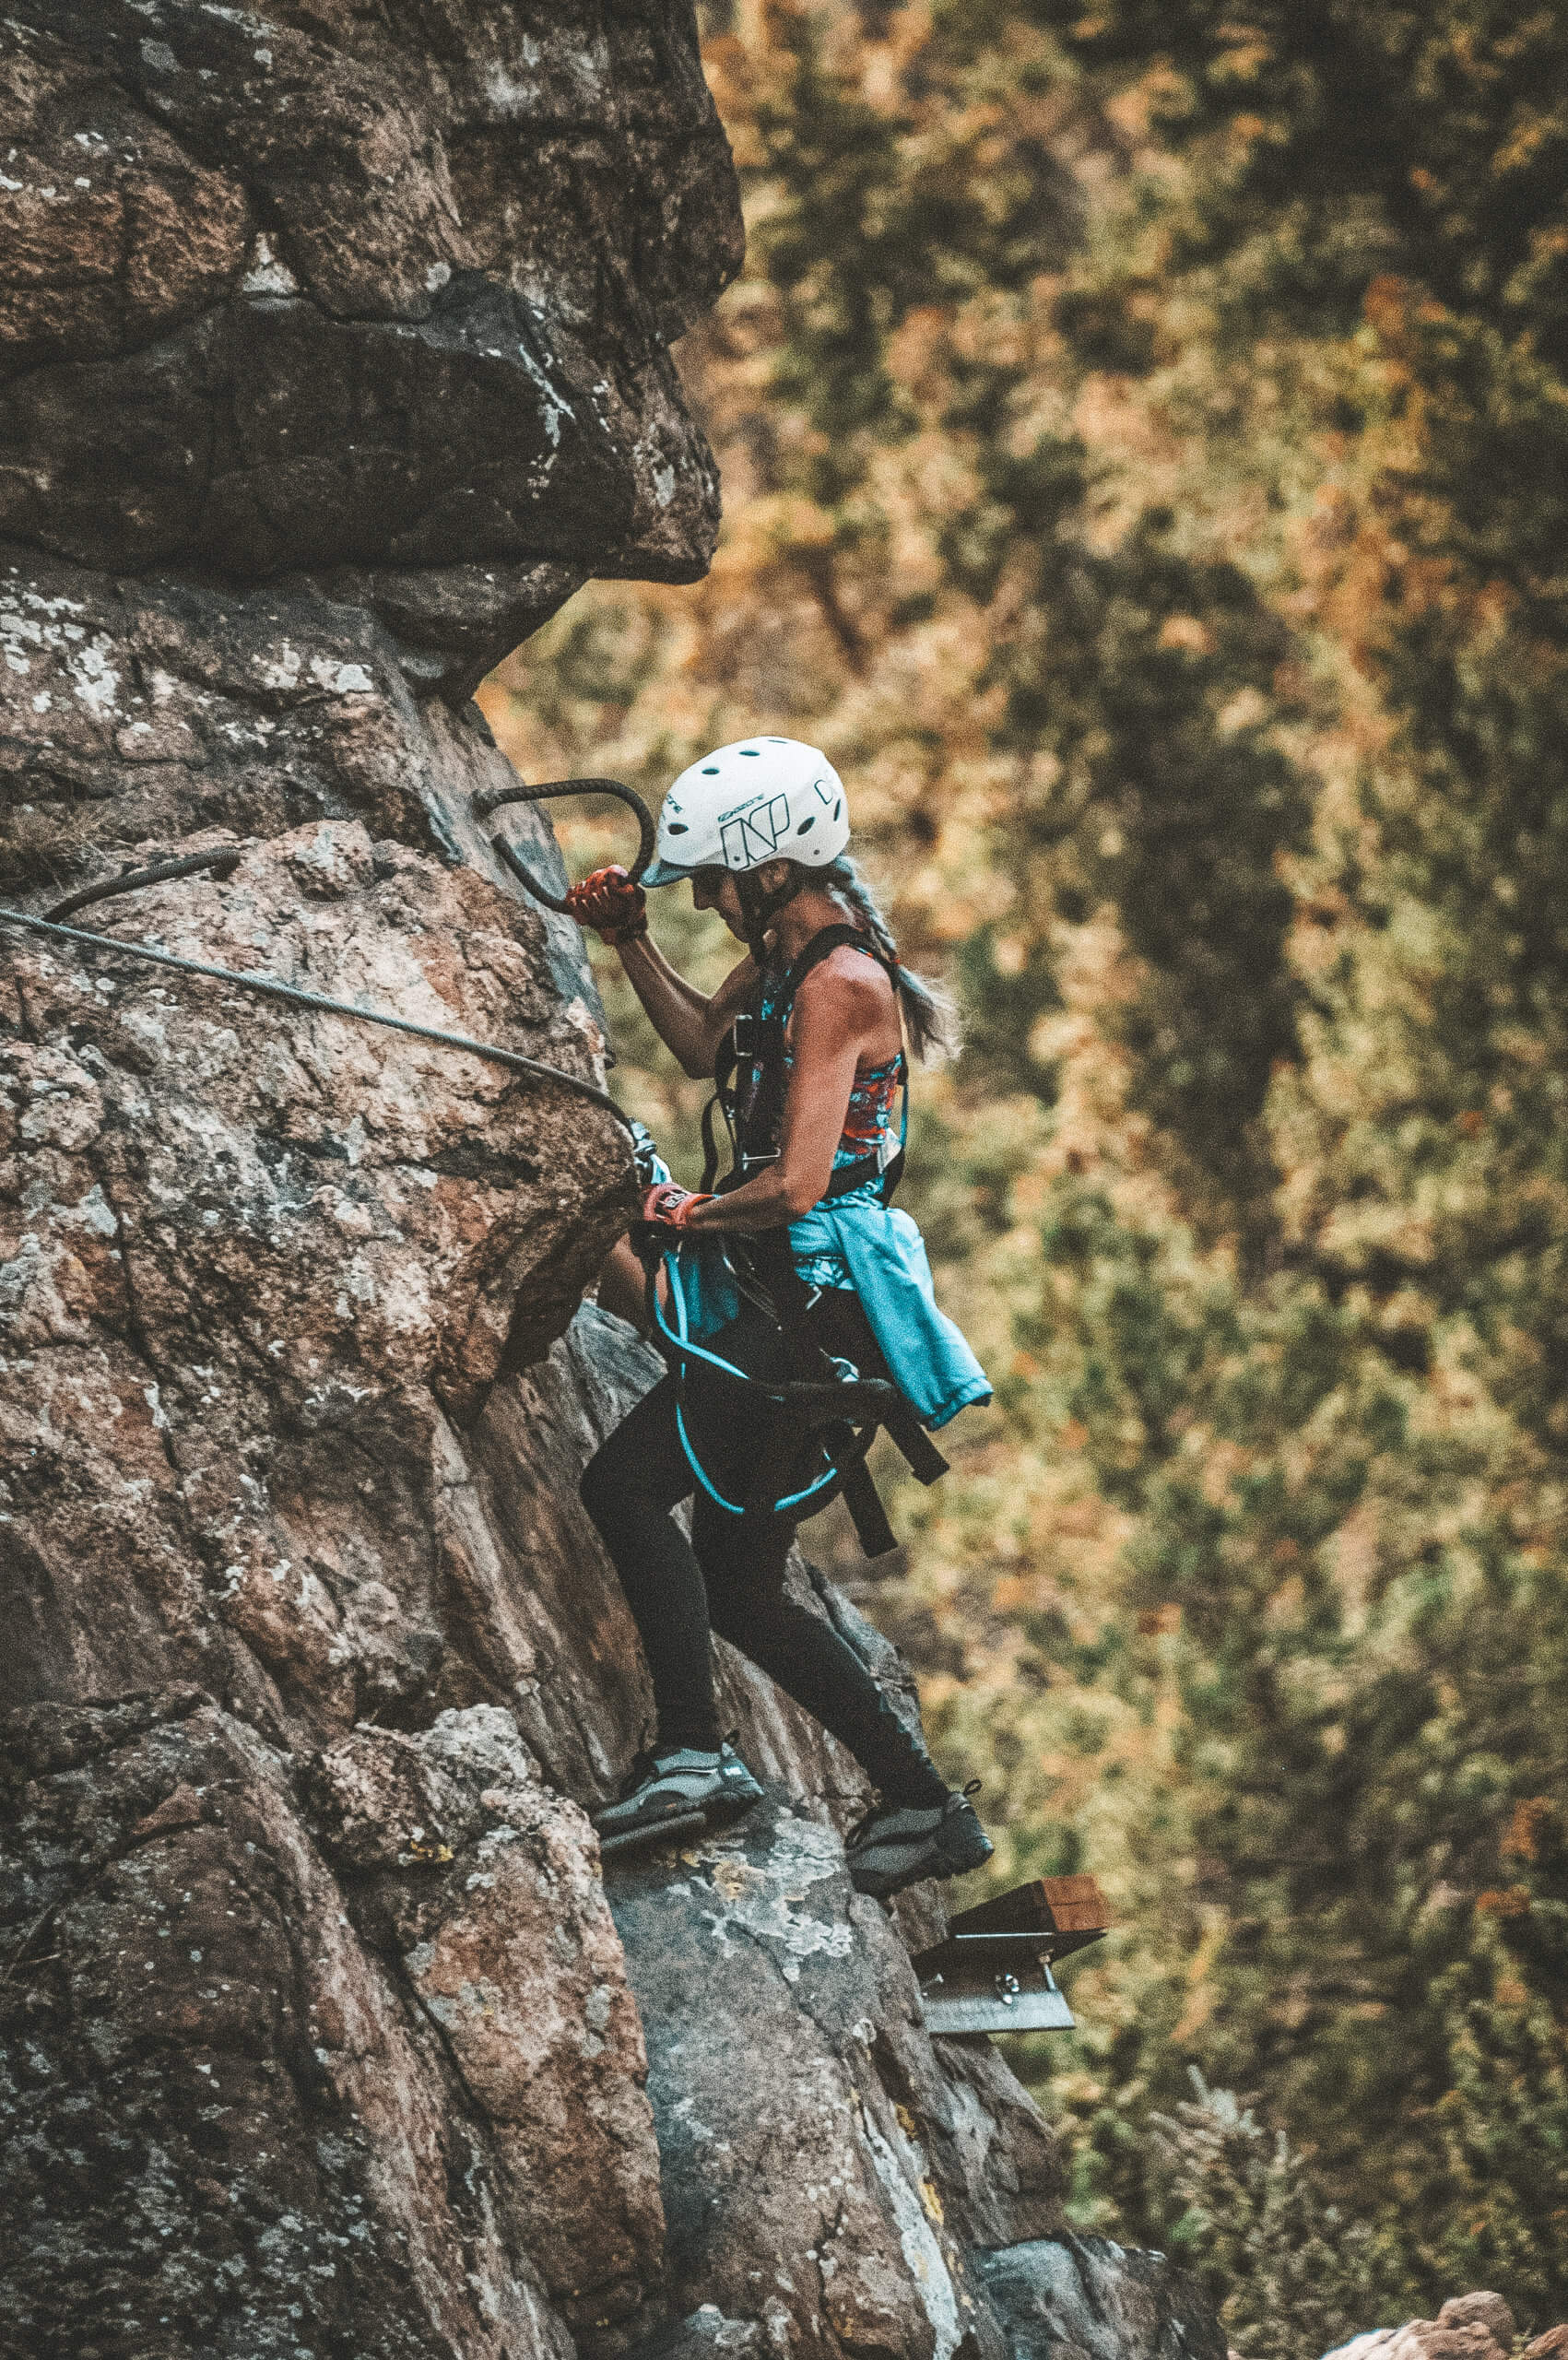 Woman on the Granite Via Ferrata about to go around the cliffside suspended by iron rungs with a mountain face in the background